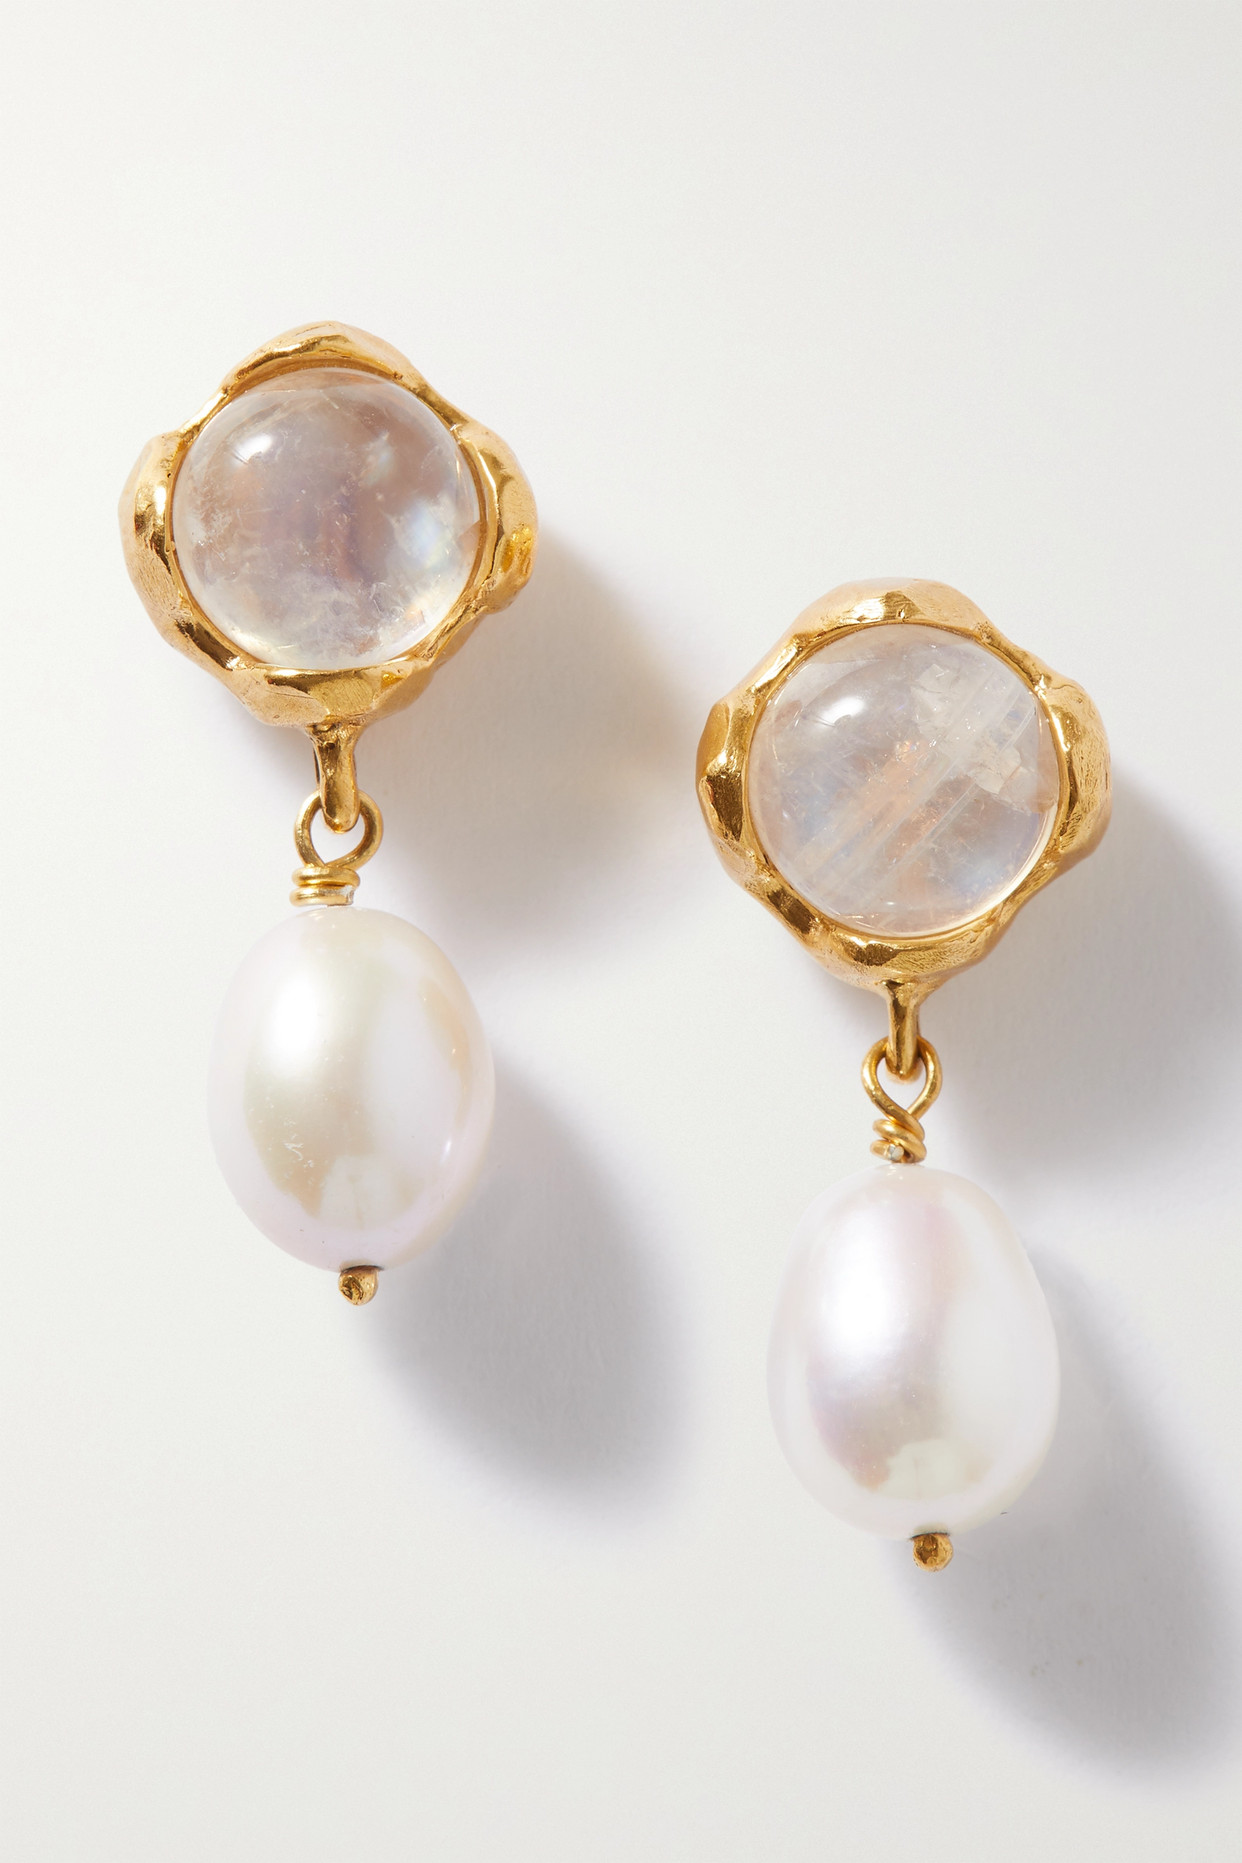 + Net Sustain the Moonlight Capture Gold-Plated, Pearl and Moonstone Earrings